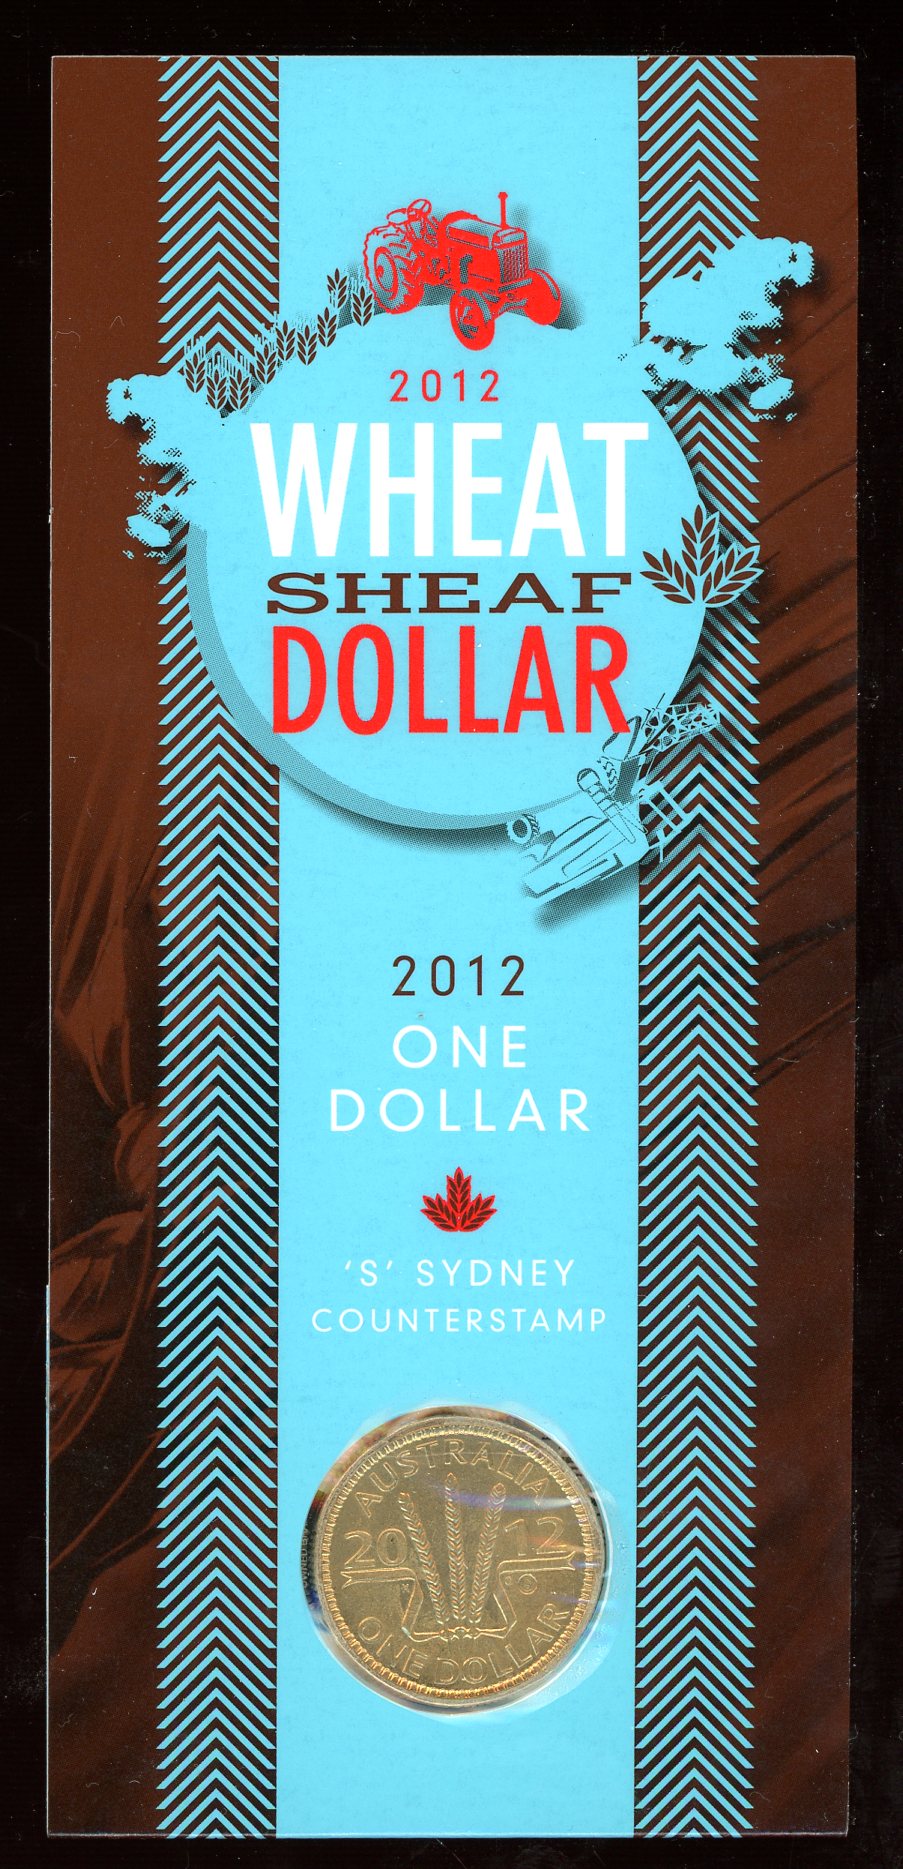 Thumbnail for 2012 Wheat Sheaf Dollar - S Counterstamp